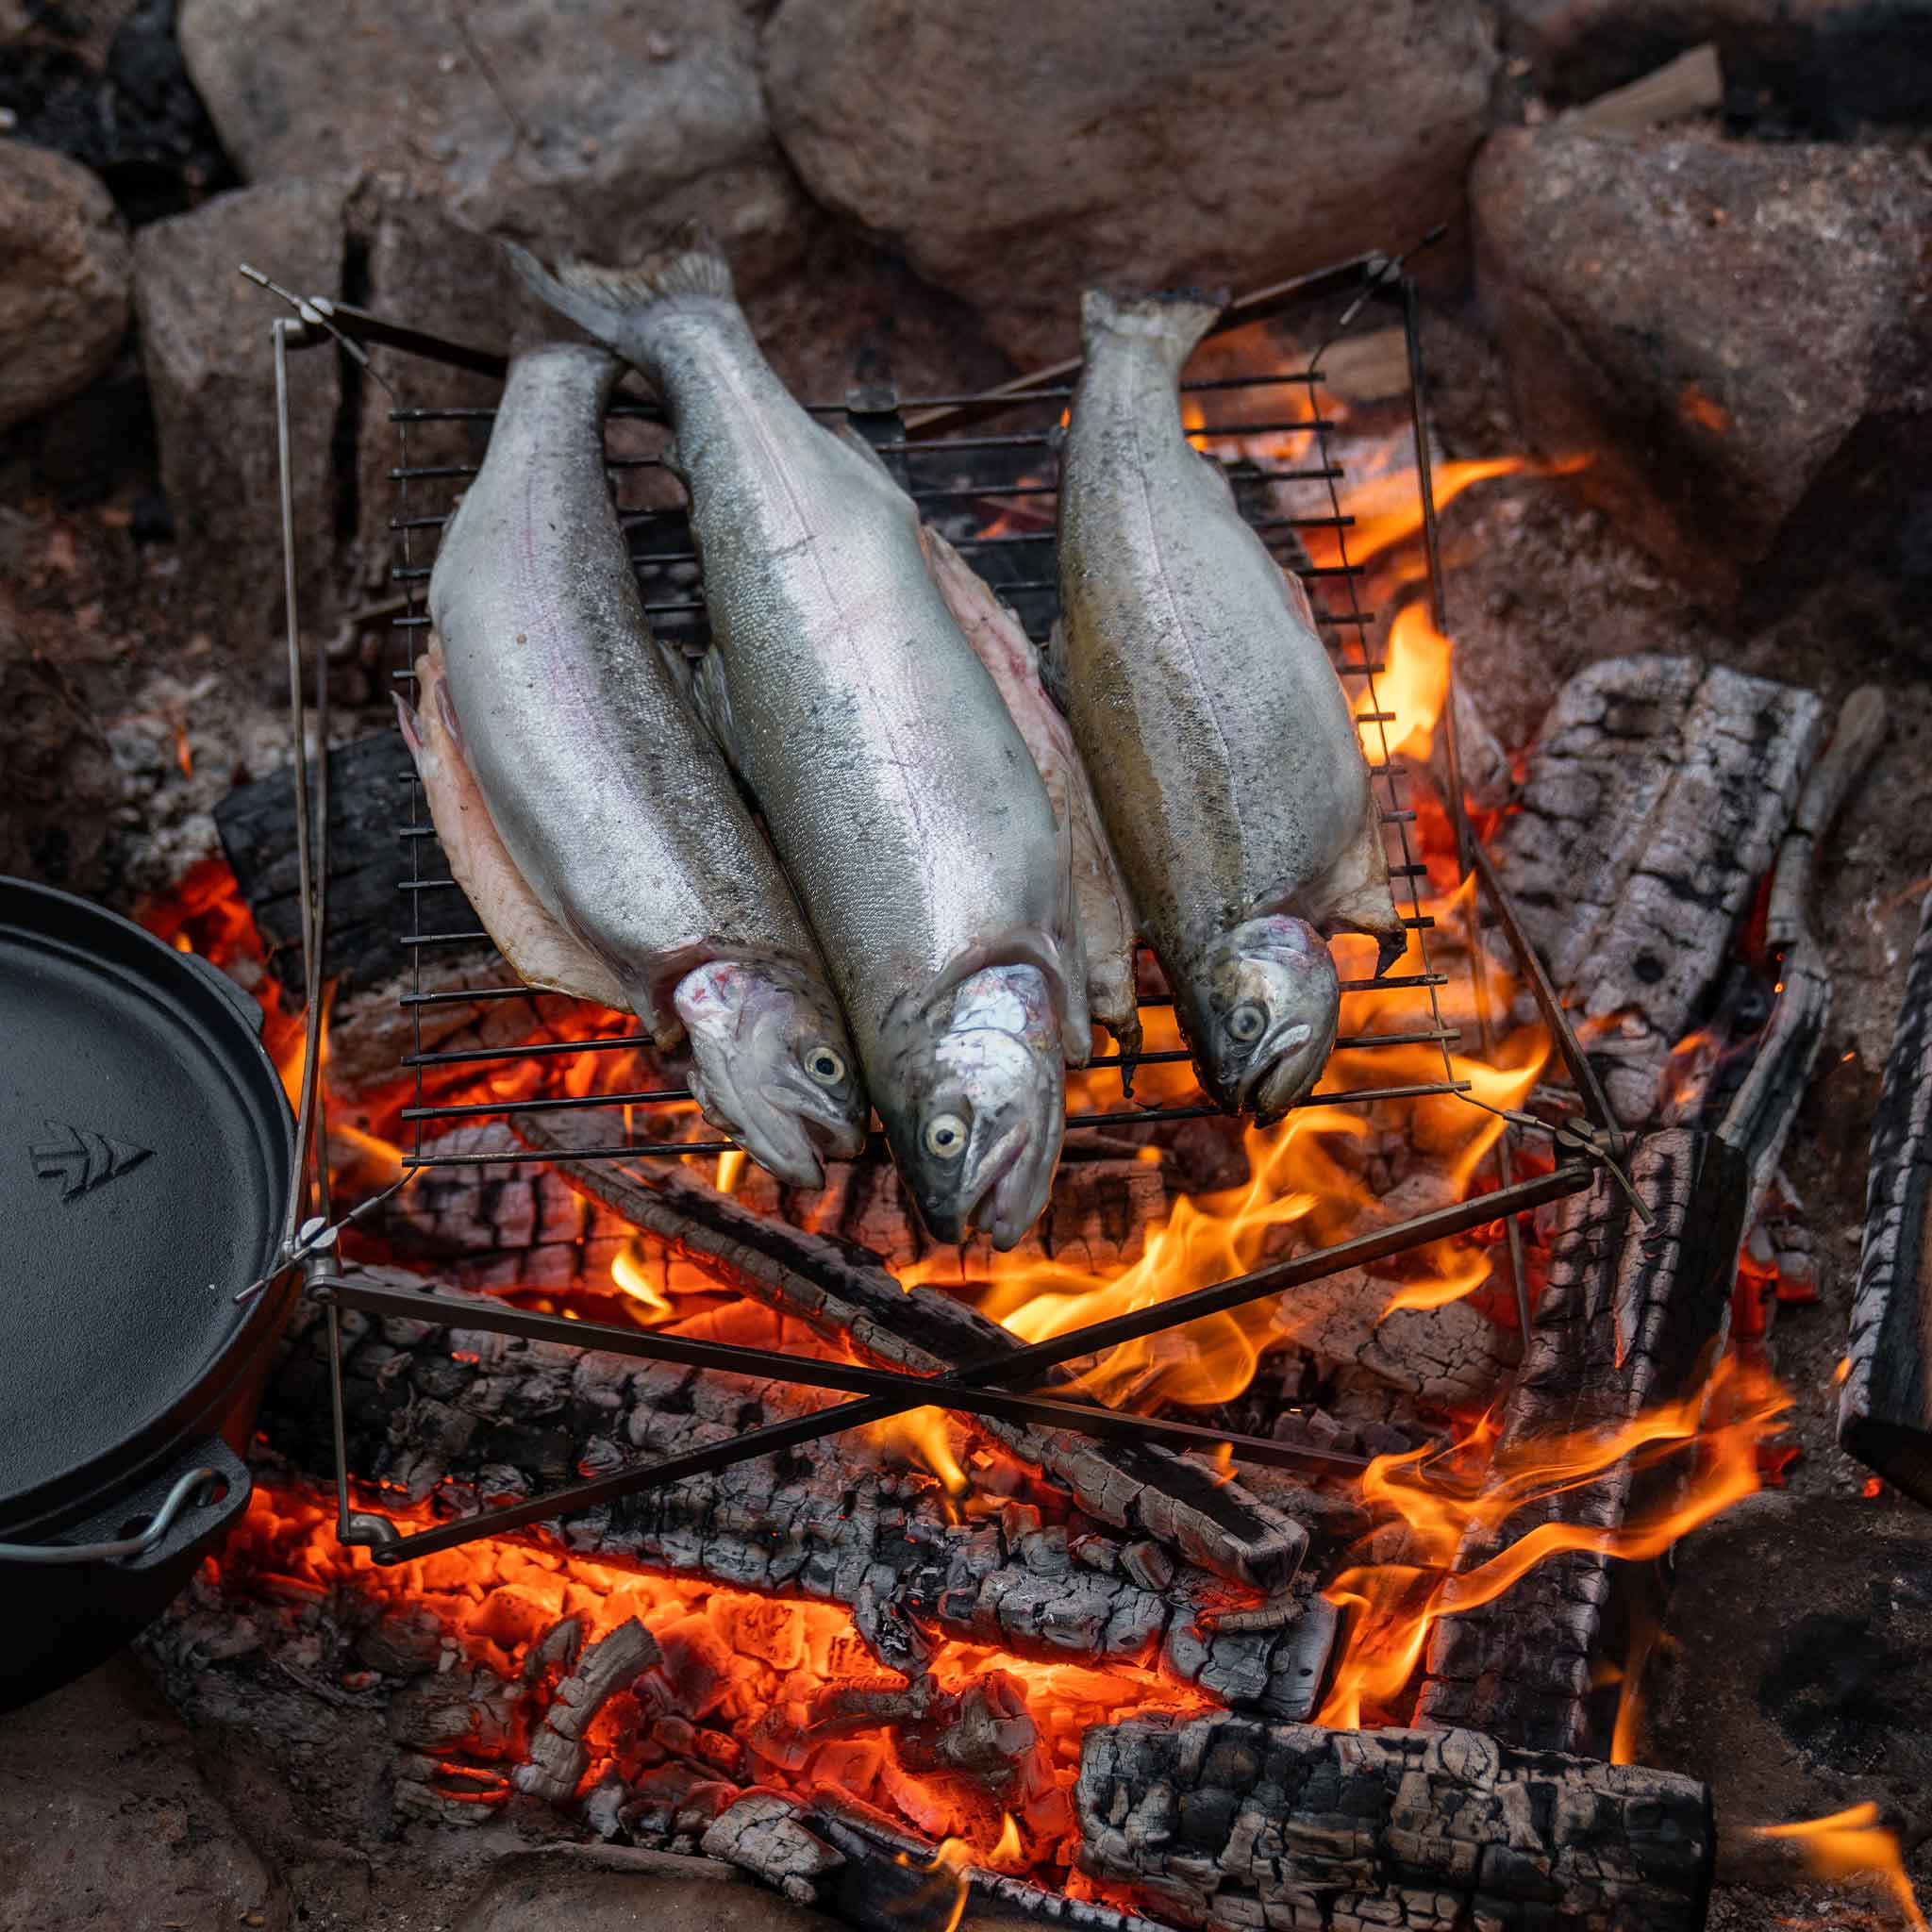 Cooking salmon campfire grill